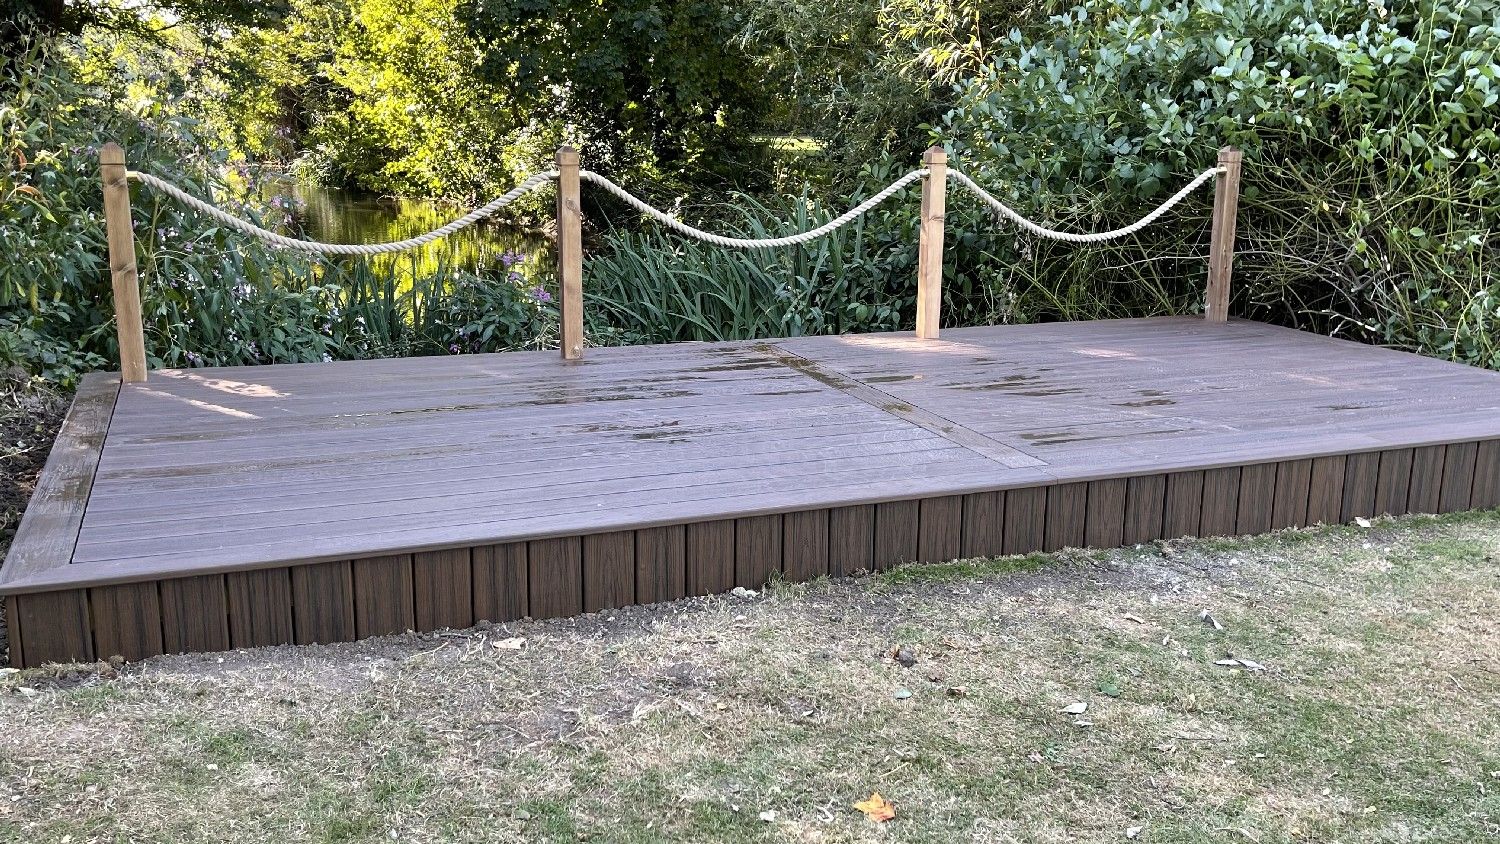 Composite decking suppliers